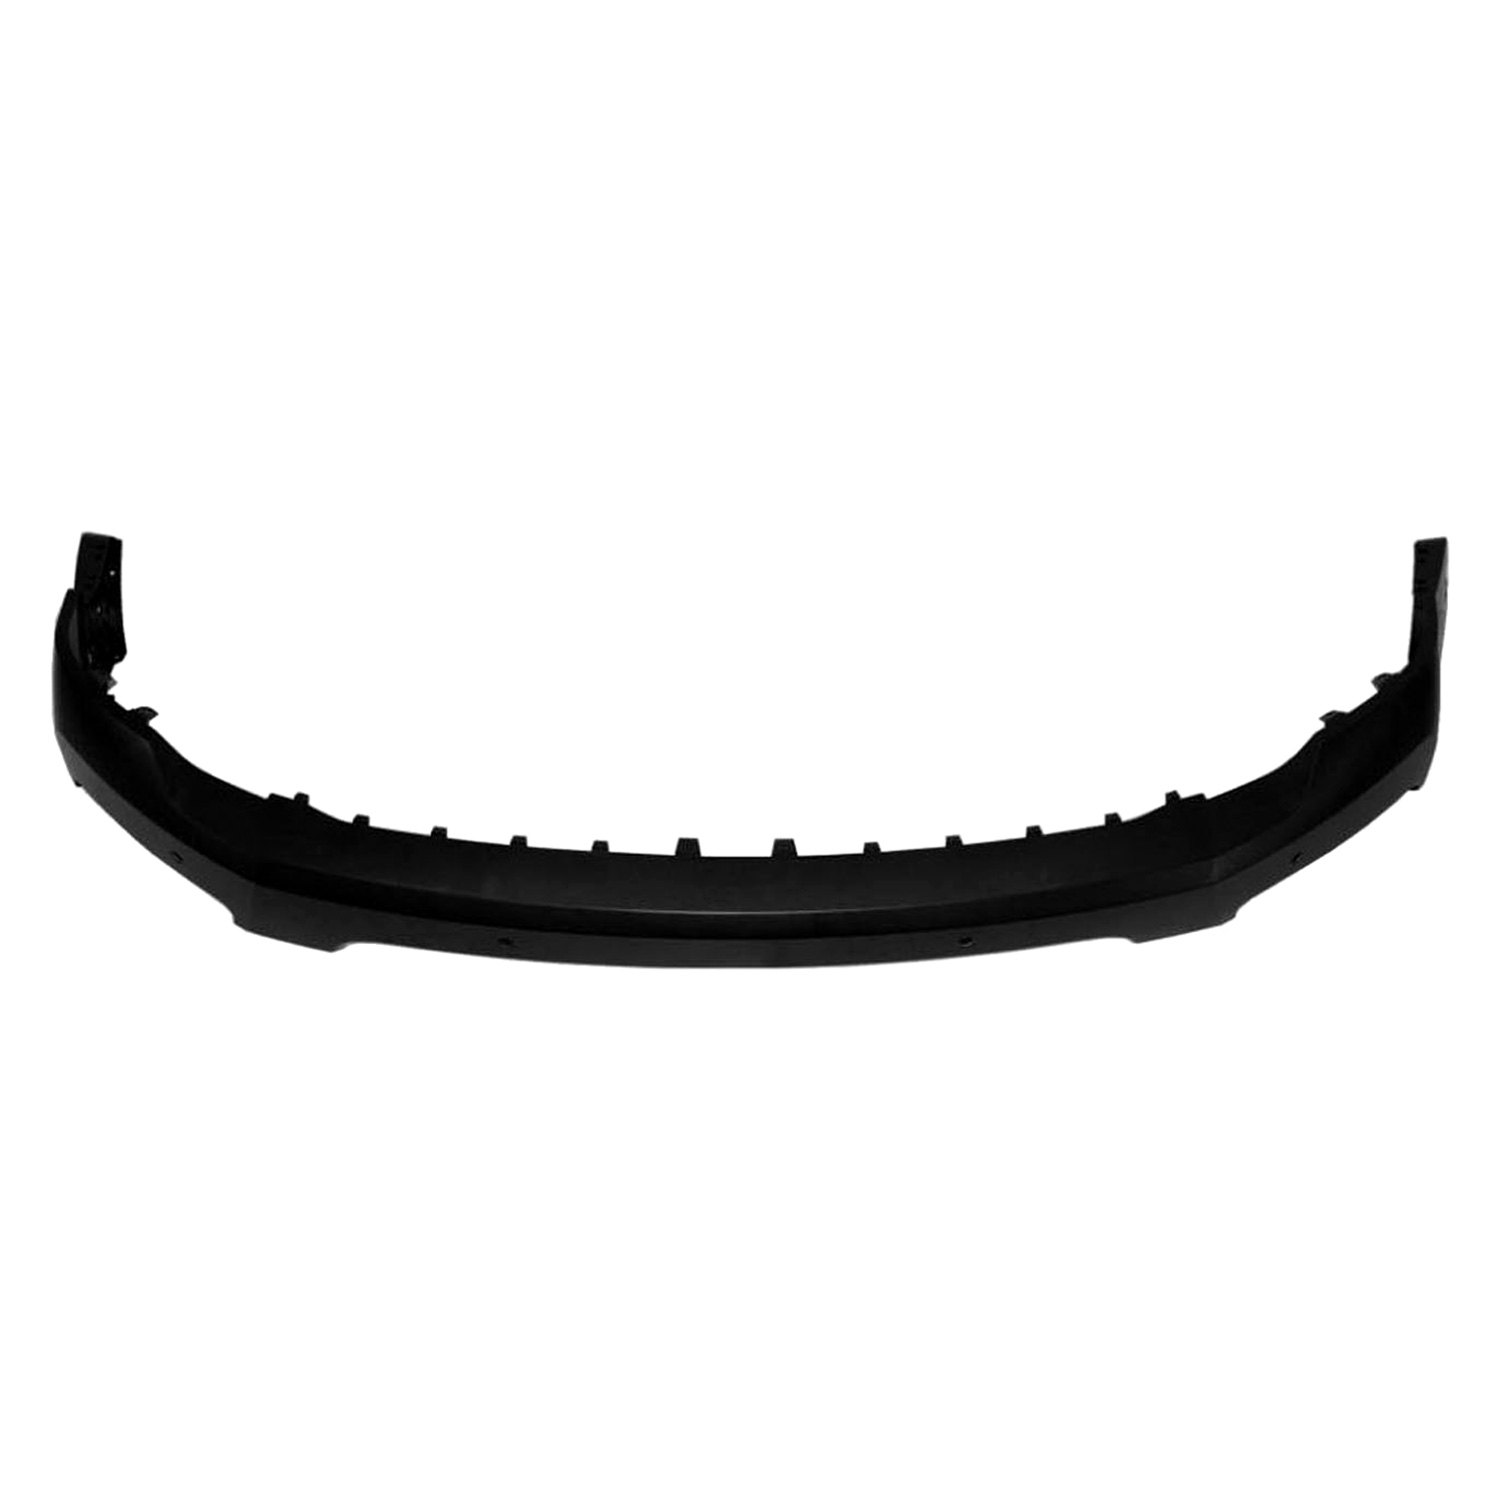 Replace® Fo1014120 Front Upper Bumper Cover Standard Line 4803